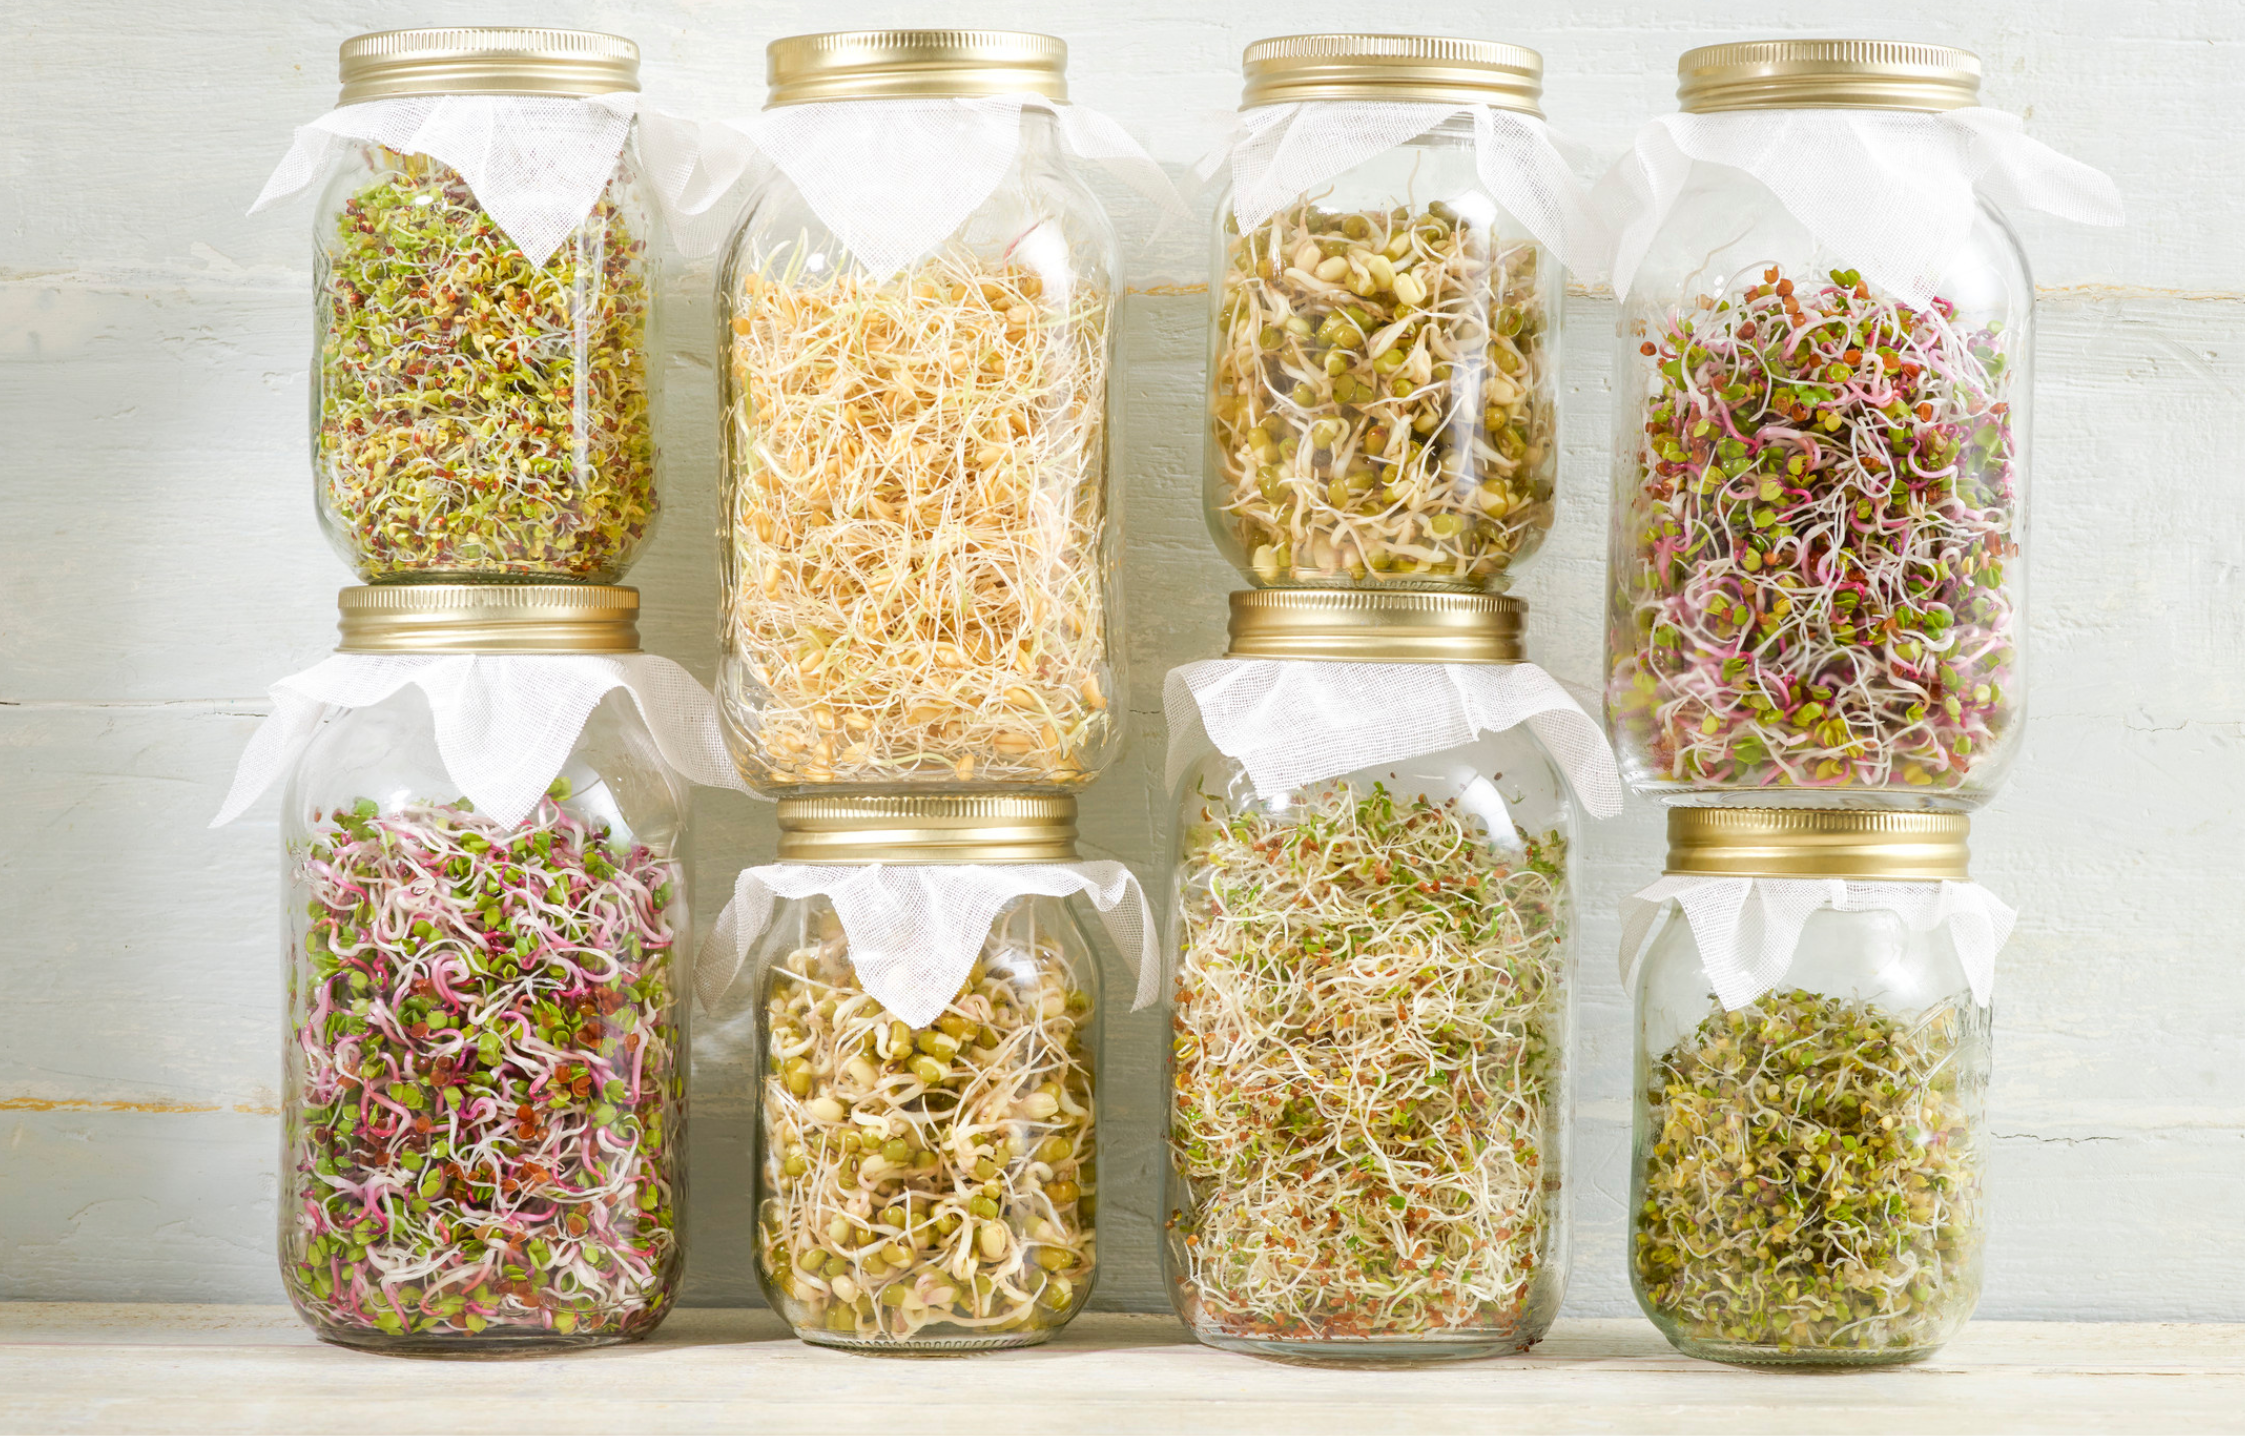 WHAT ARE THE BEST SEEDS FOR SPROUTING?